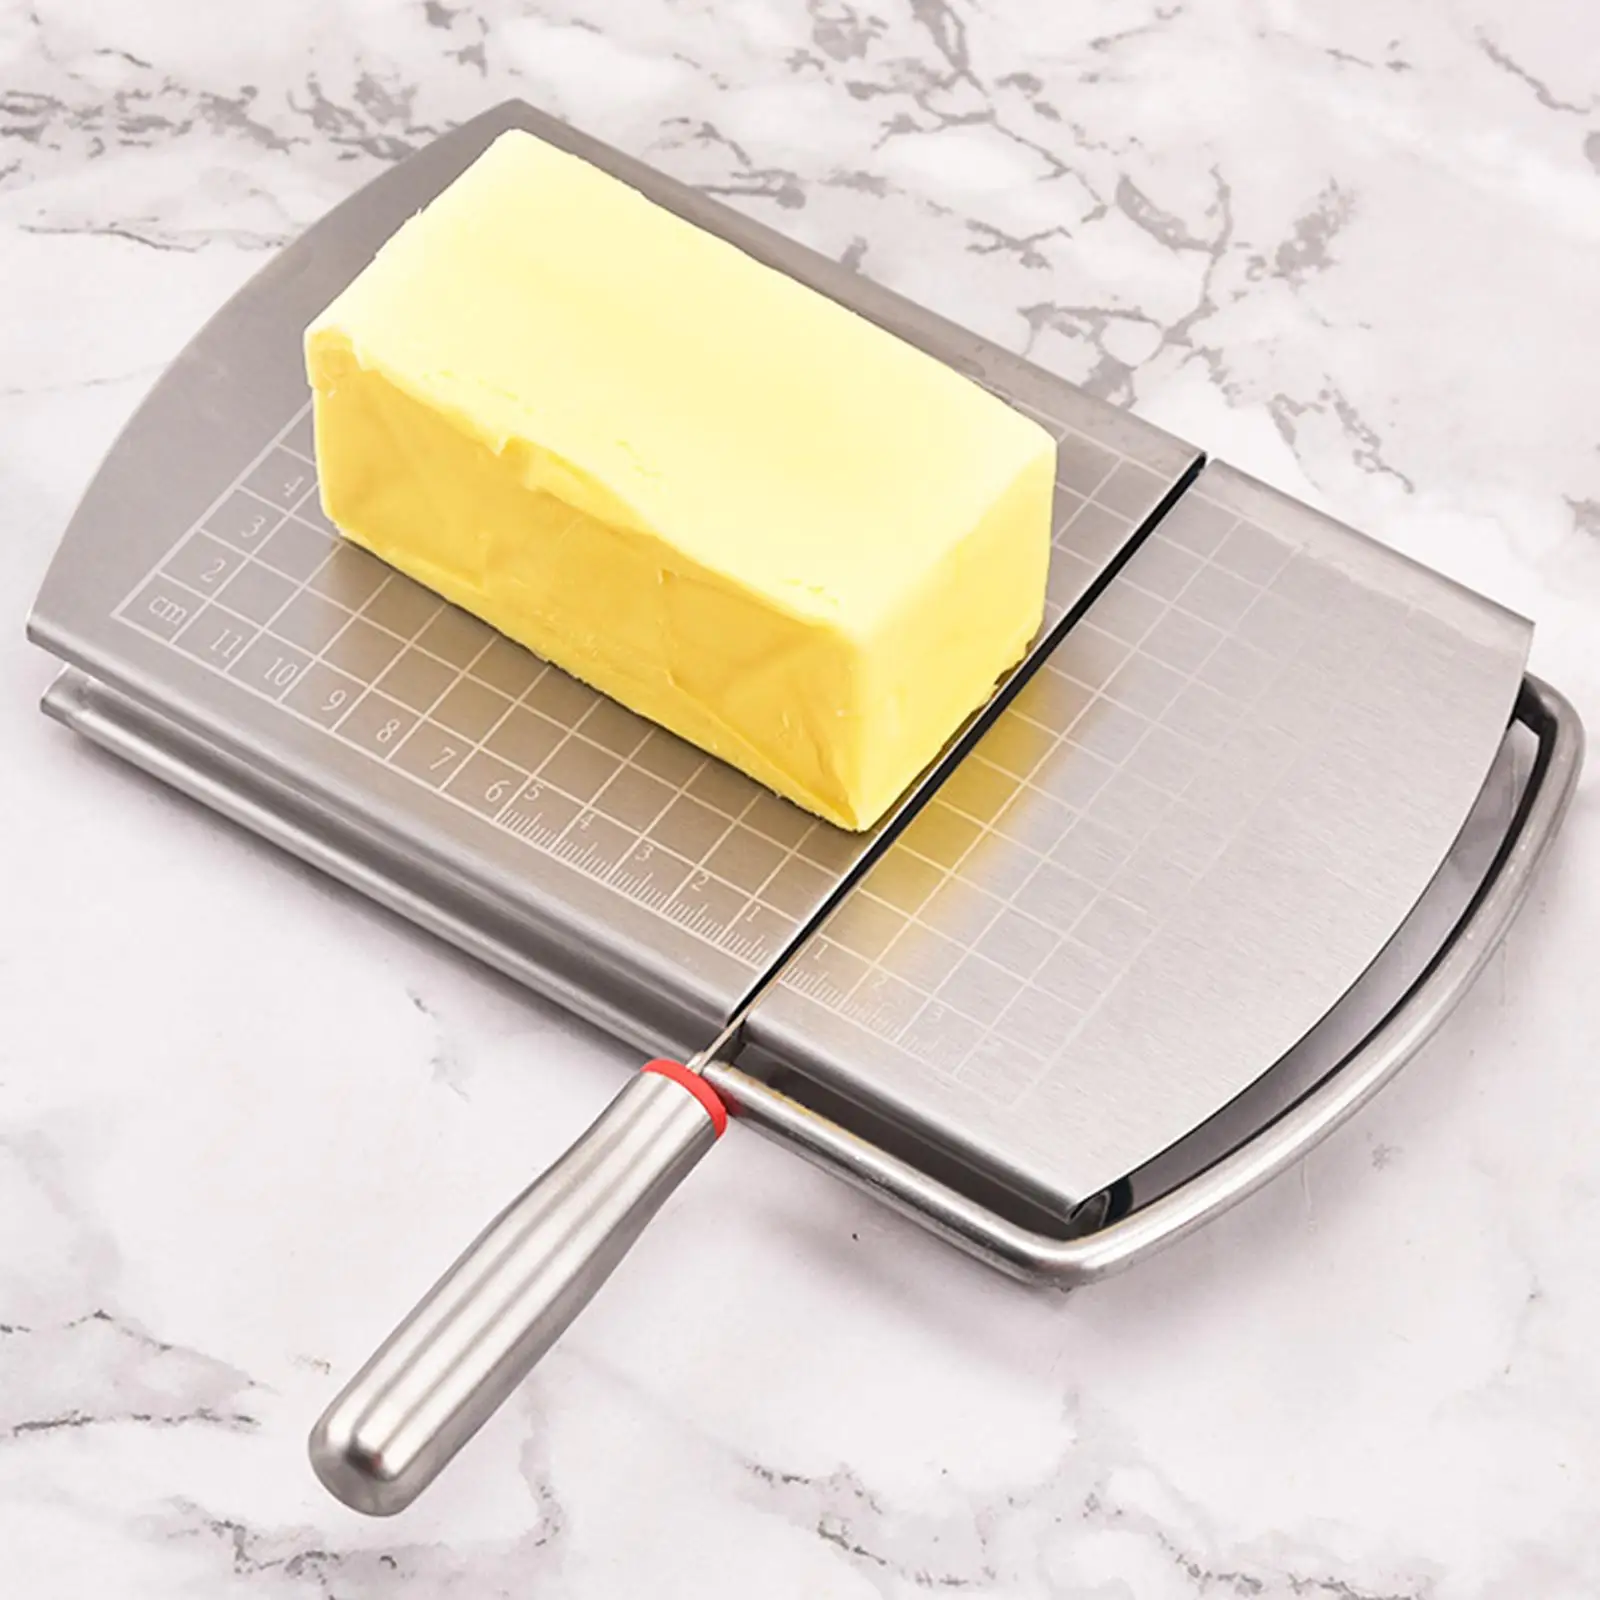 Cheese Slicer Heavy Duty Multifunctional Precise Scale Gift Kitchen Gadget Convenient Cheese Cutter for Bar Cafe Home Kitchen